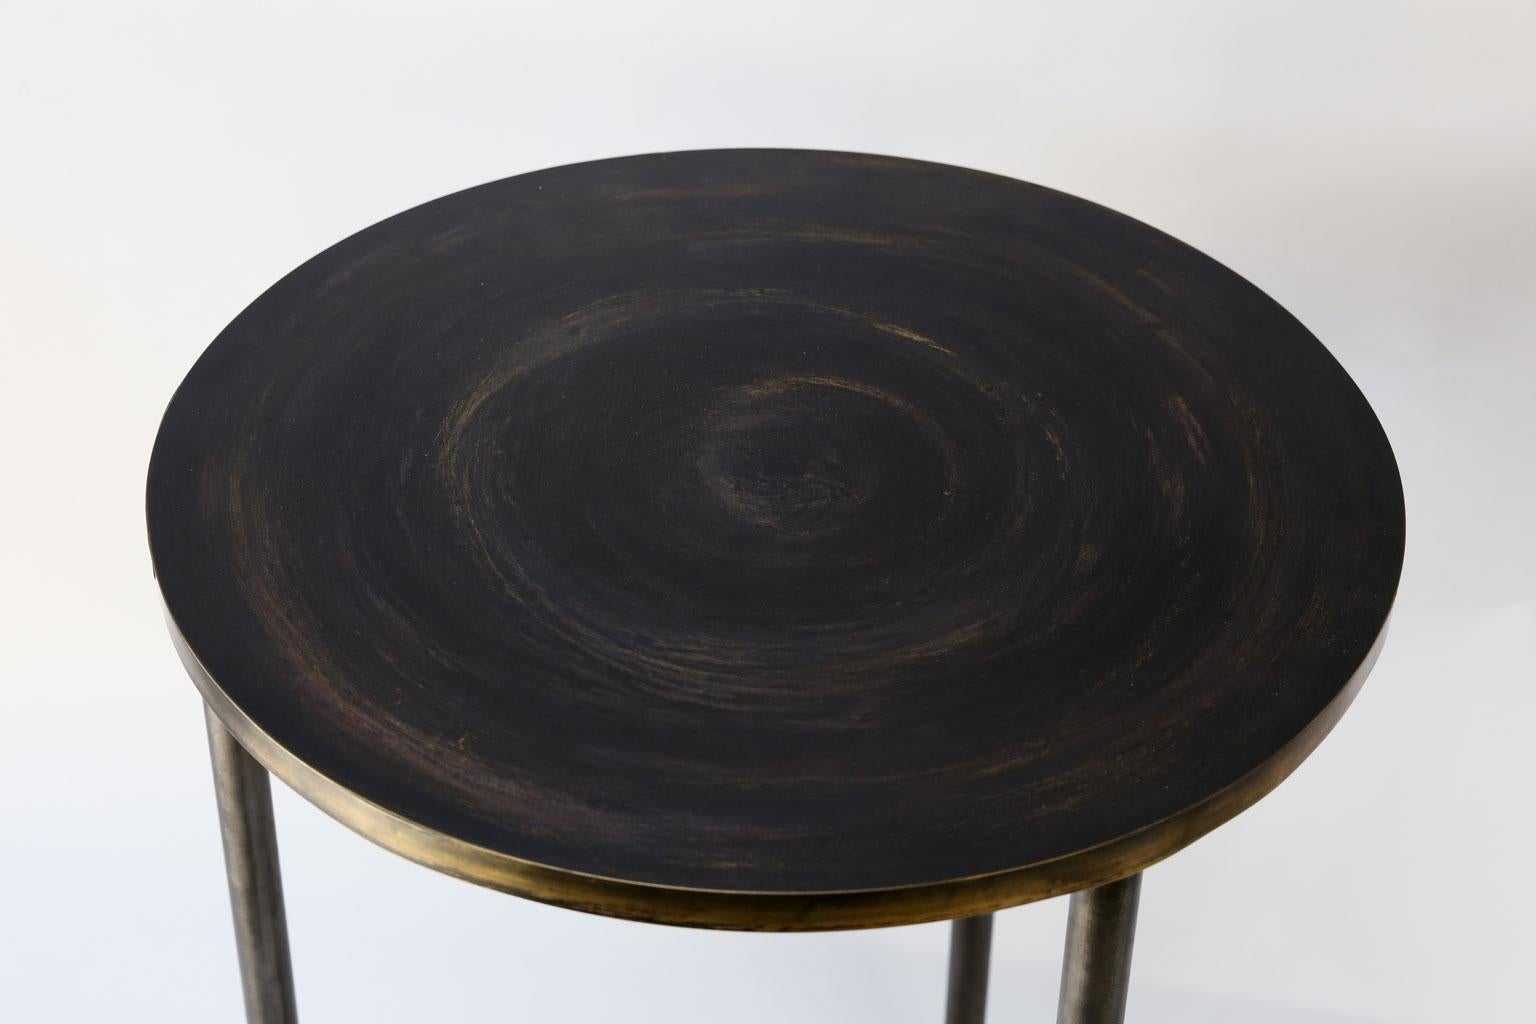 Custom steel and brass side table, table has a round brass top with a brass banded edge upon a three-legged steel base. Finish of top features light circular swirl design contrasting against a dark background.